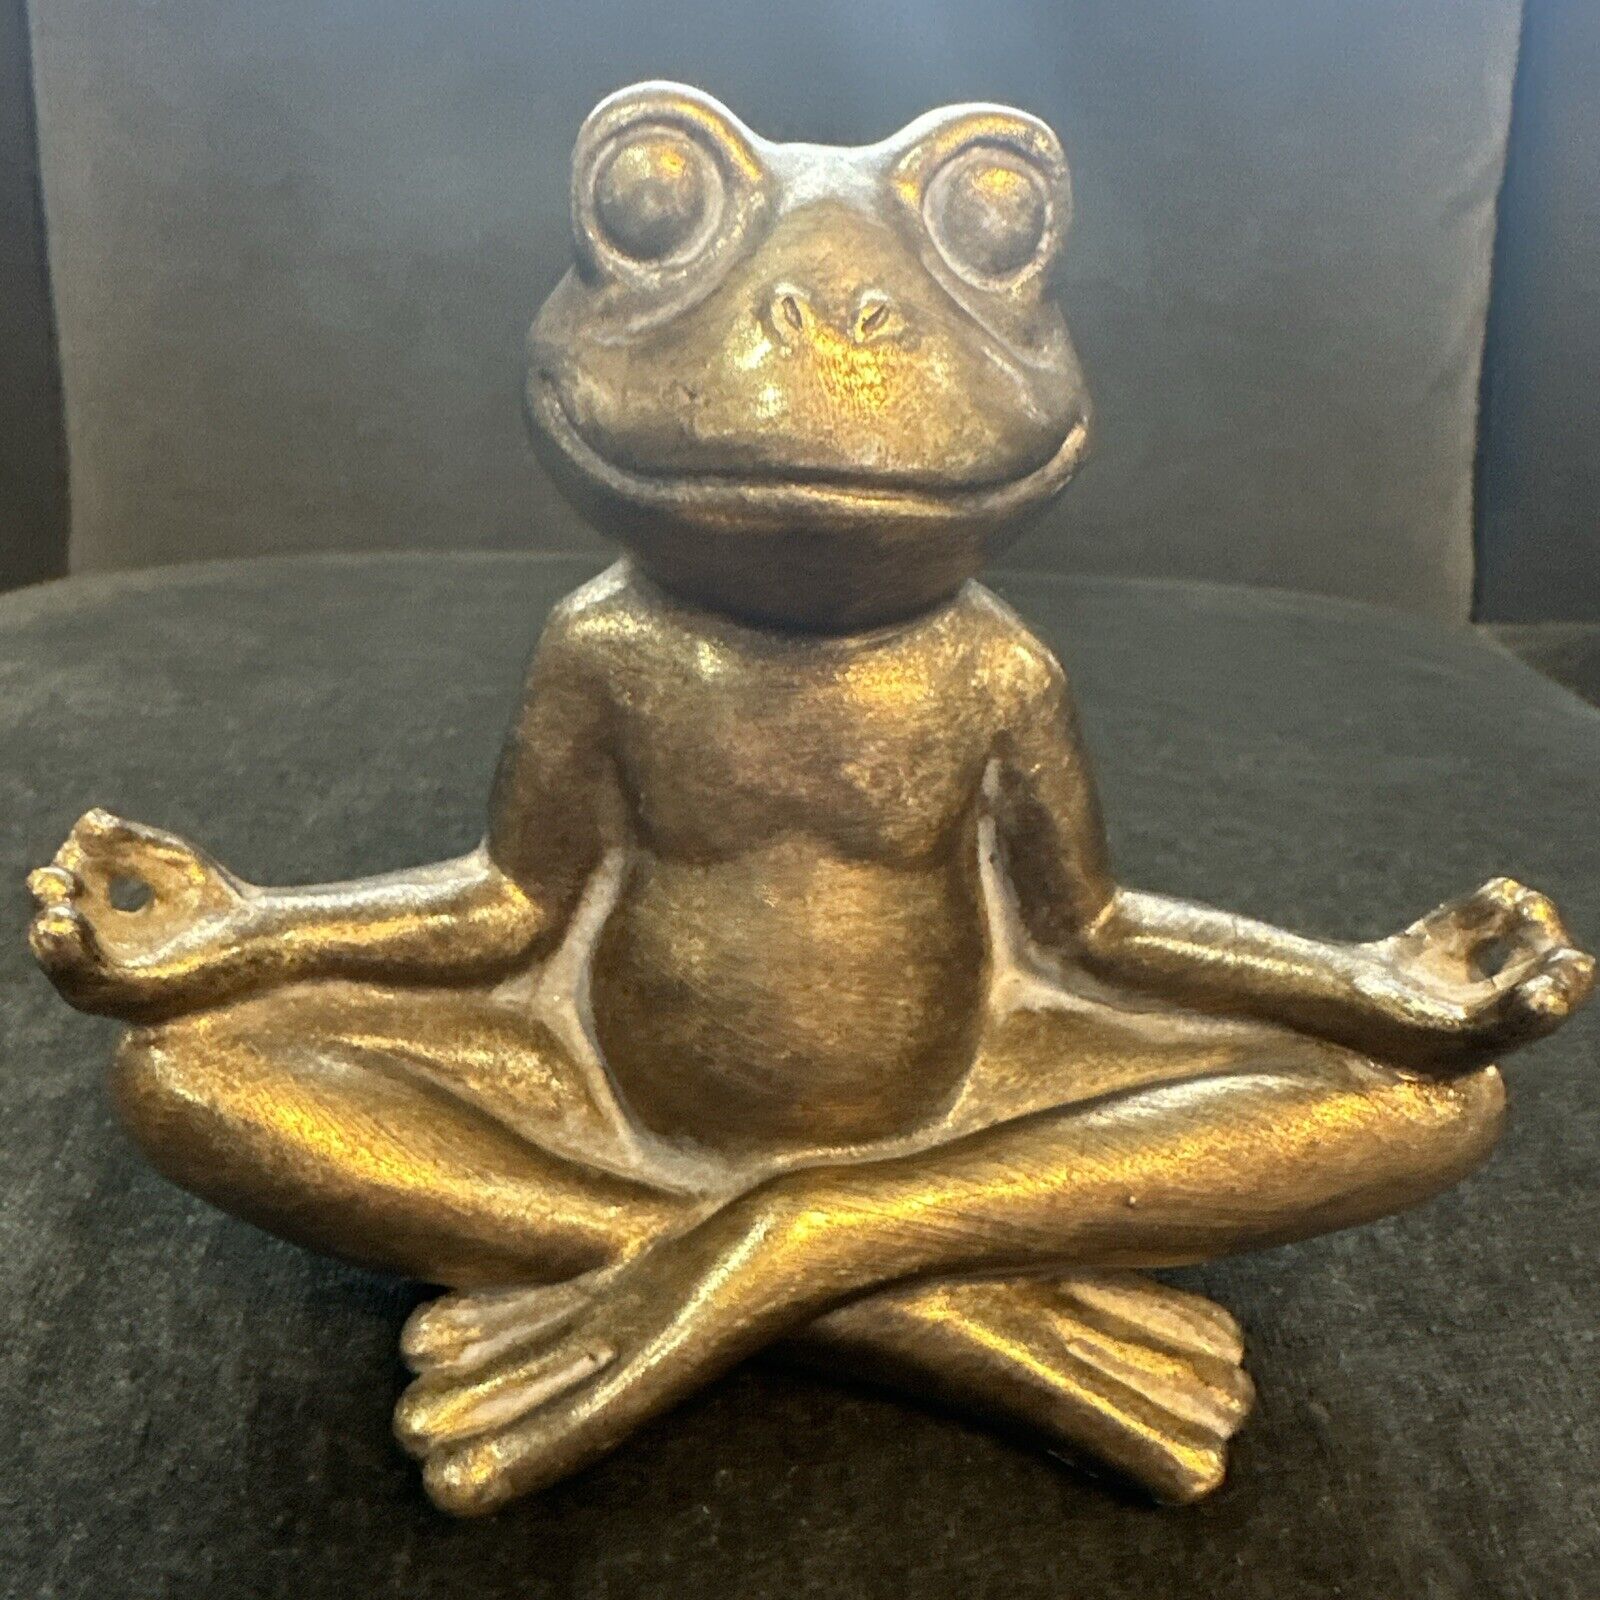 Yoga Frog in Lotus Position Figure Gold Color